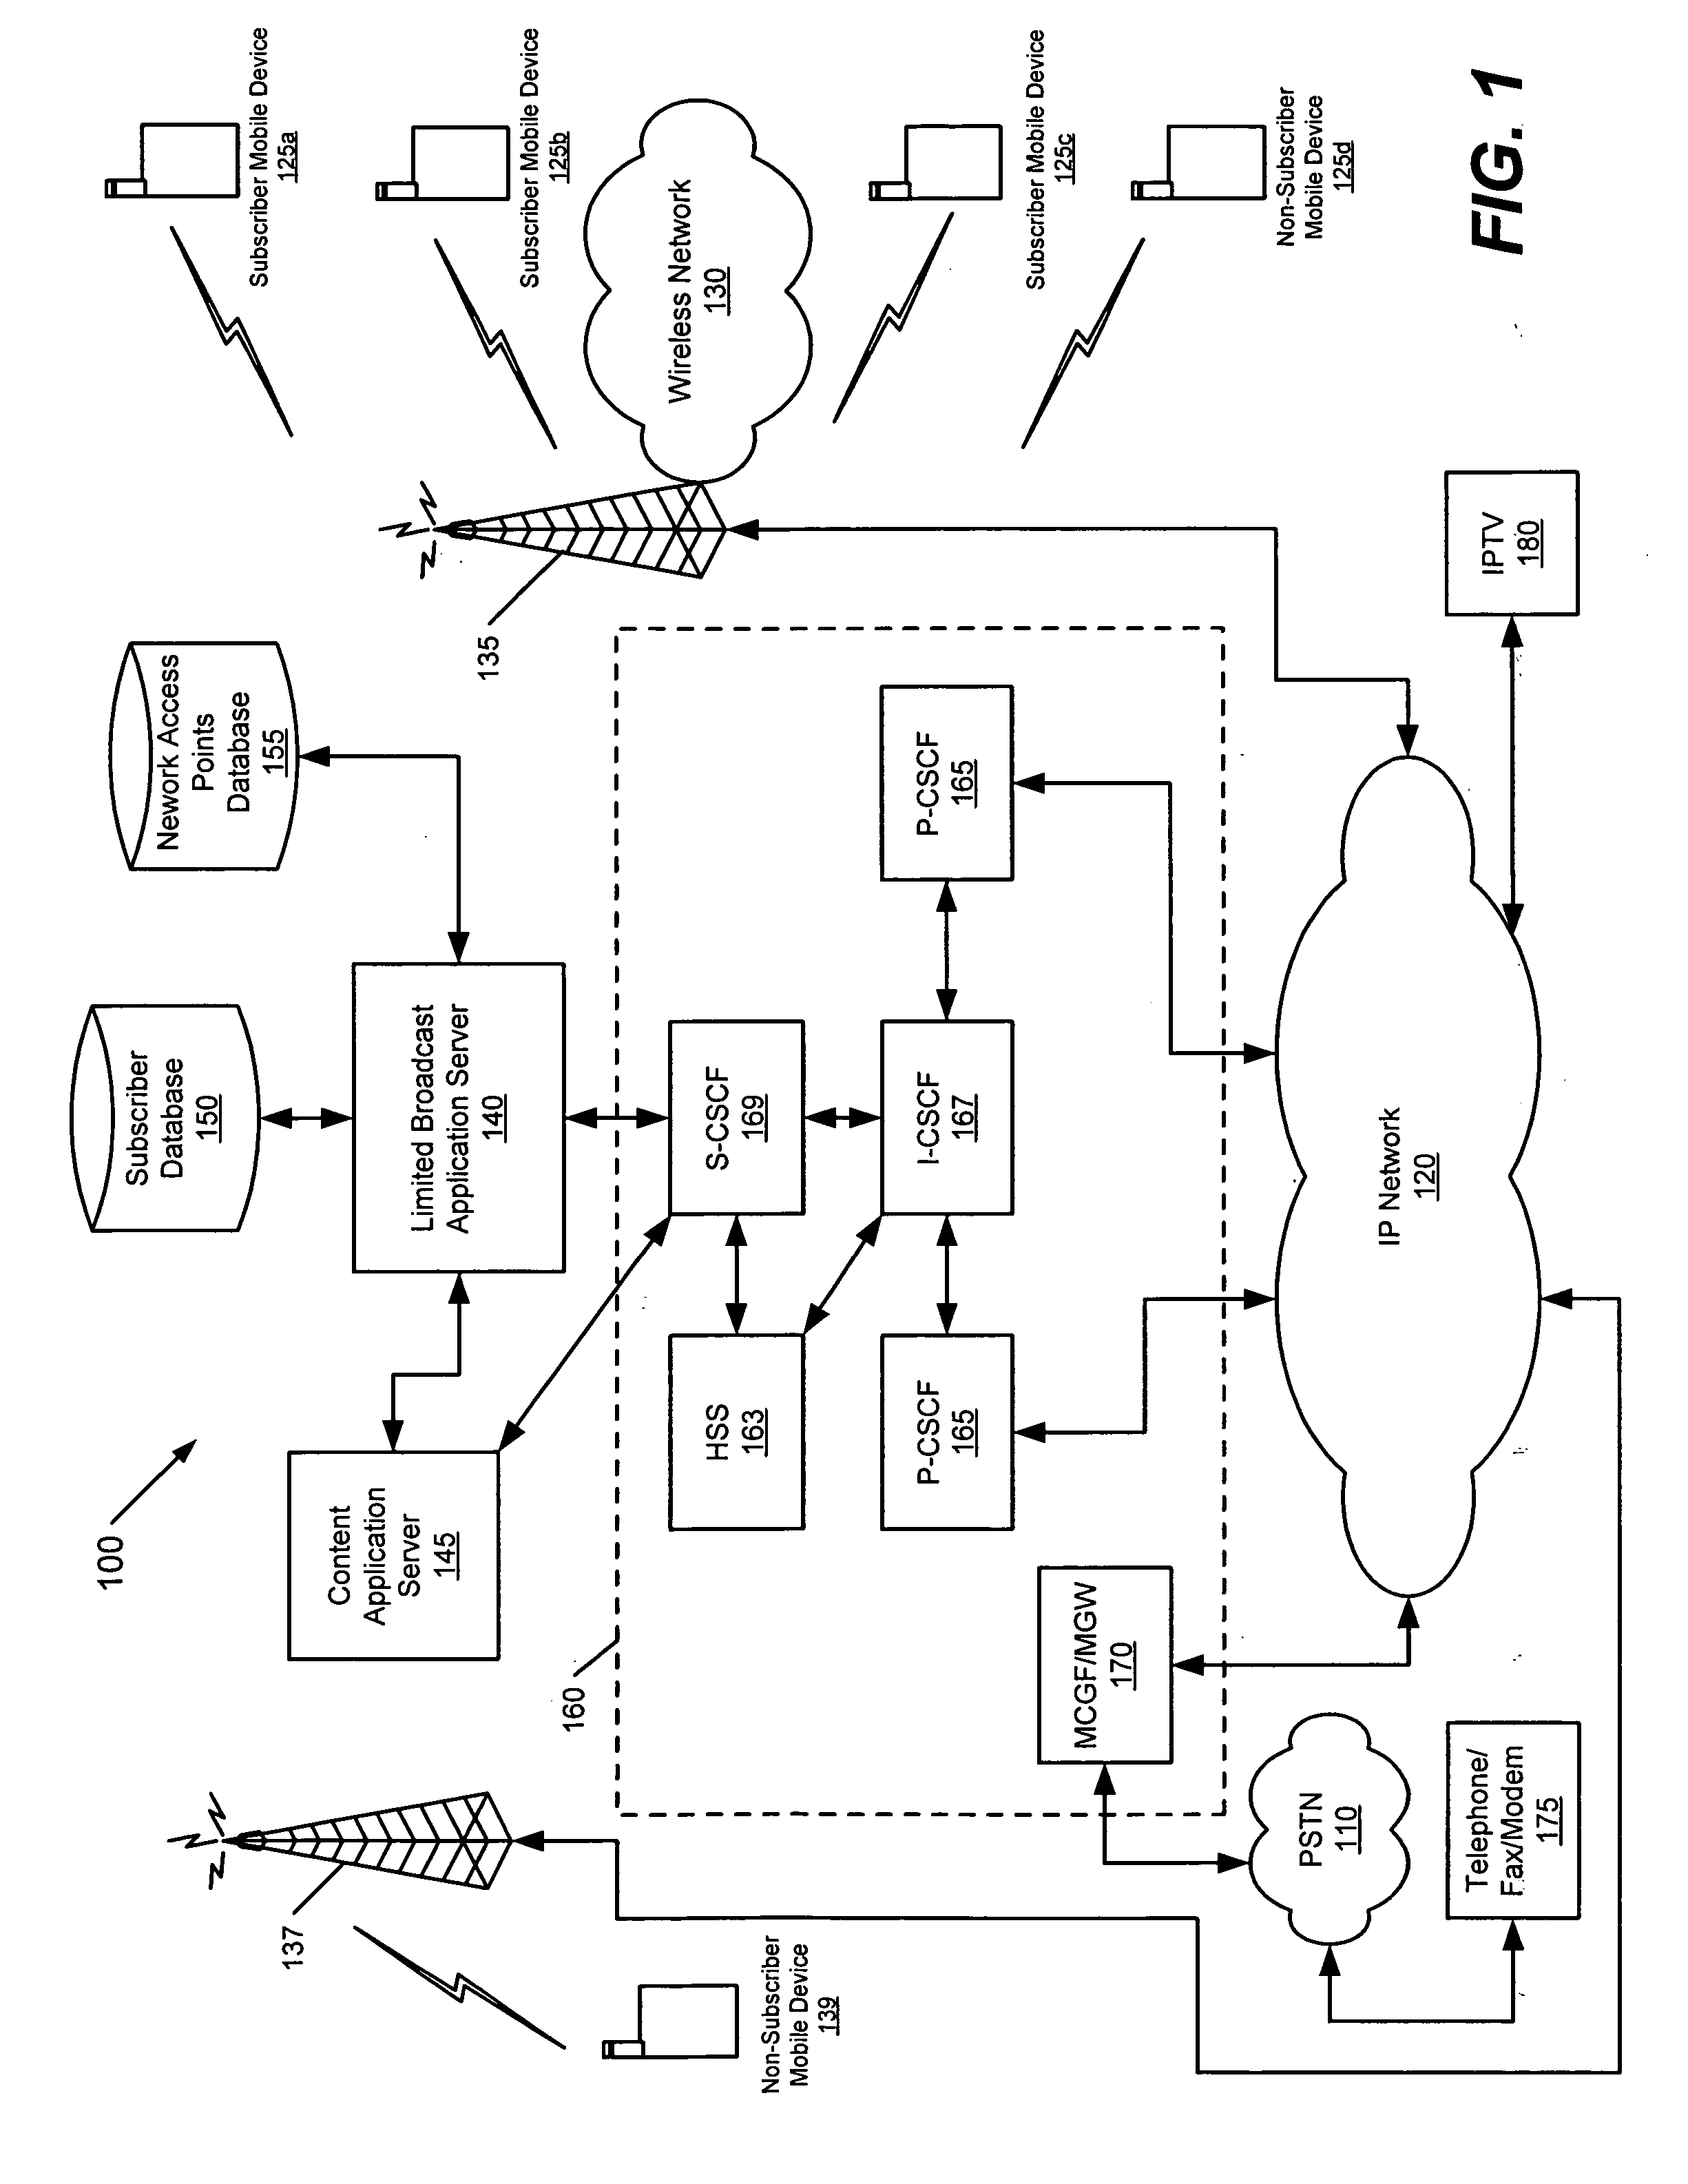 Methods, systems, and computer program products for providing multimedia information services over a communication network